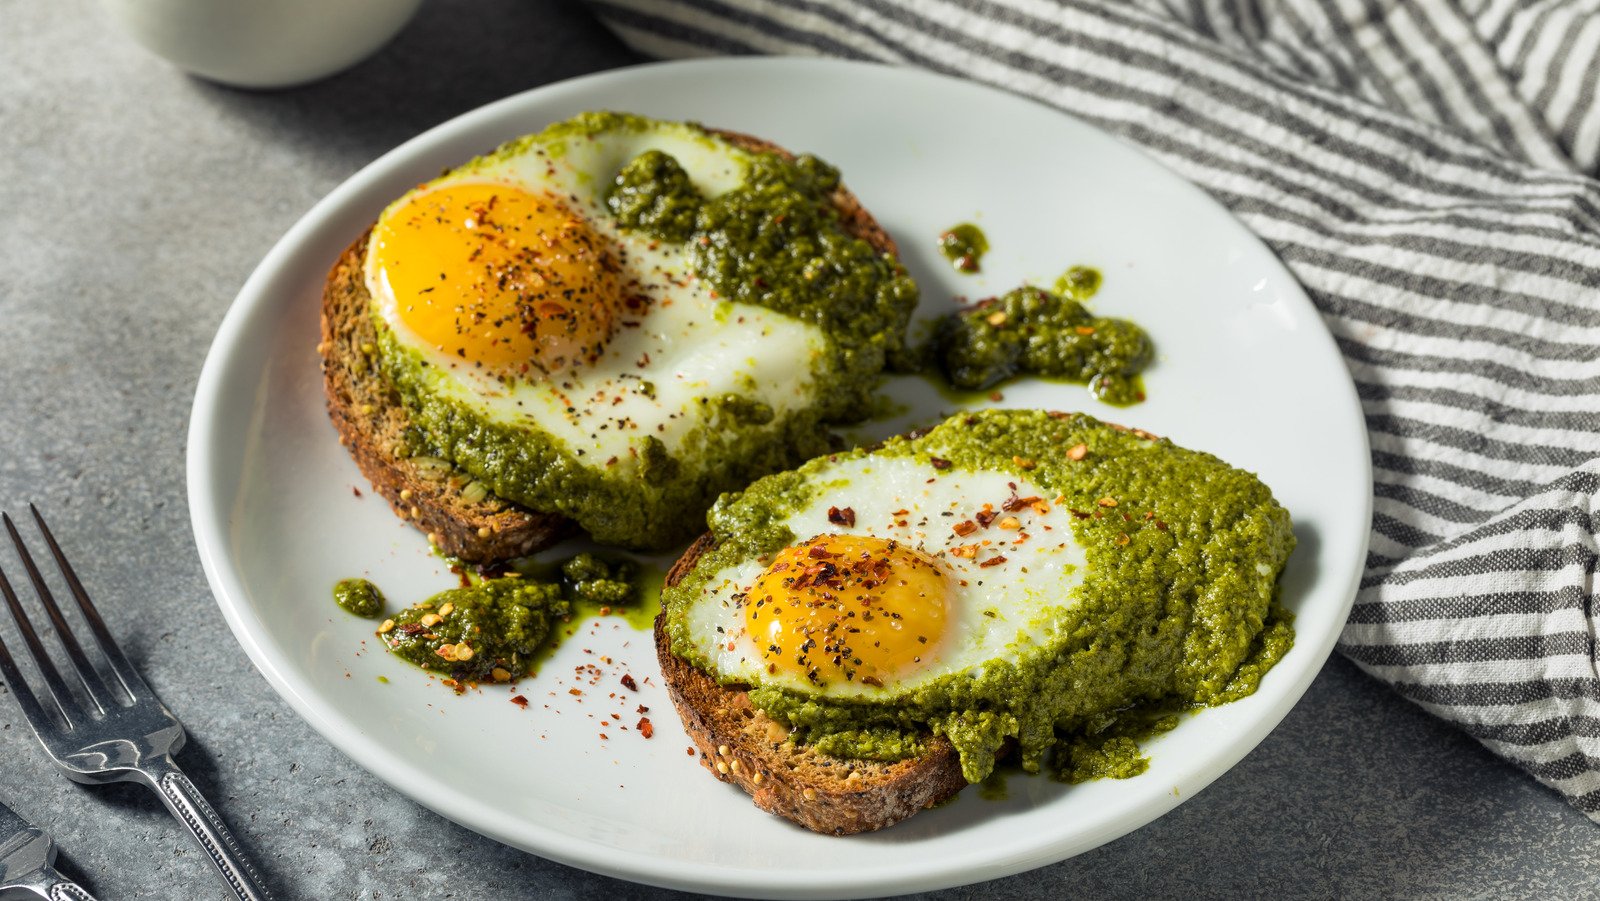 11 Sauces You Should Be Using To Season Eggs